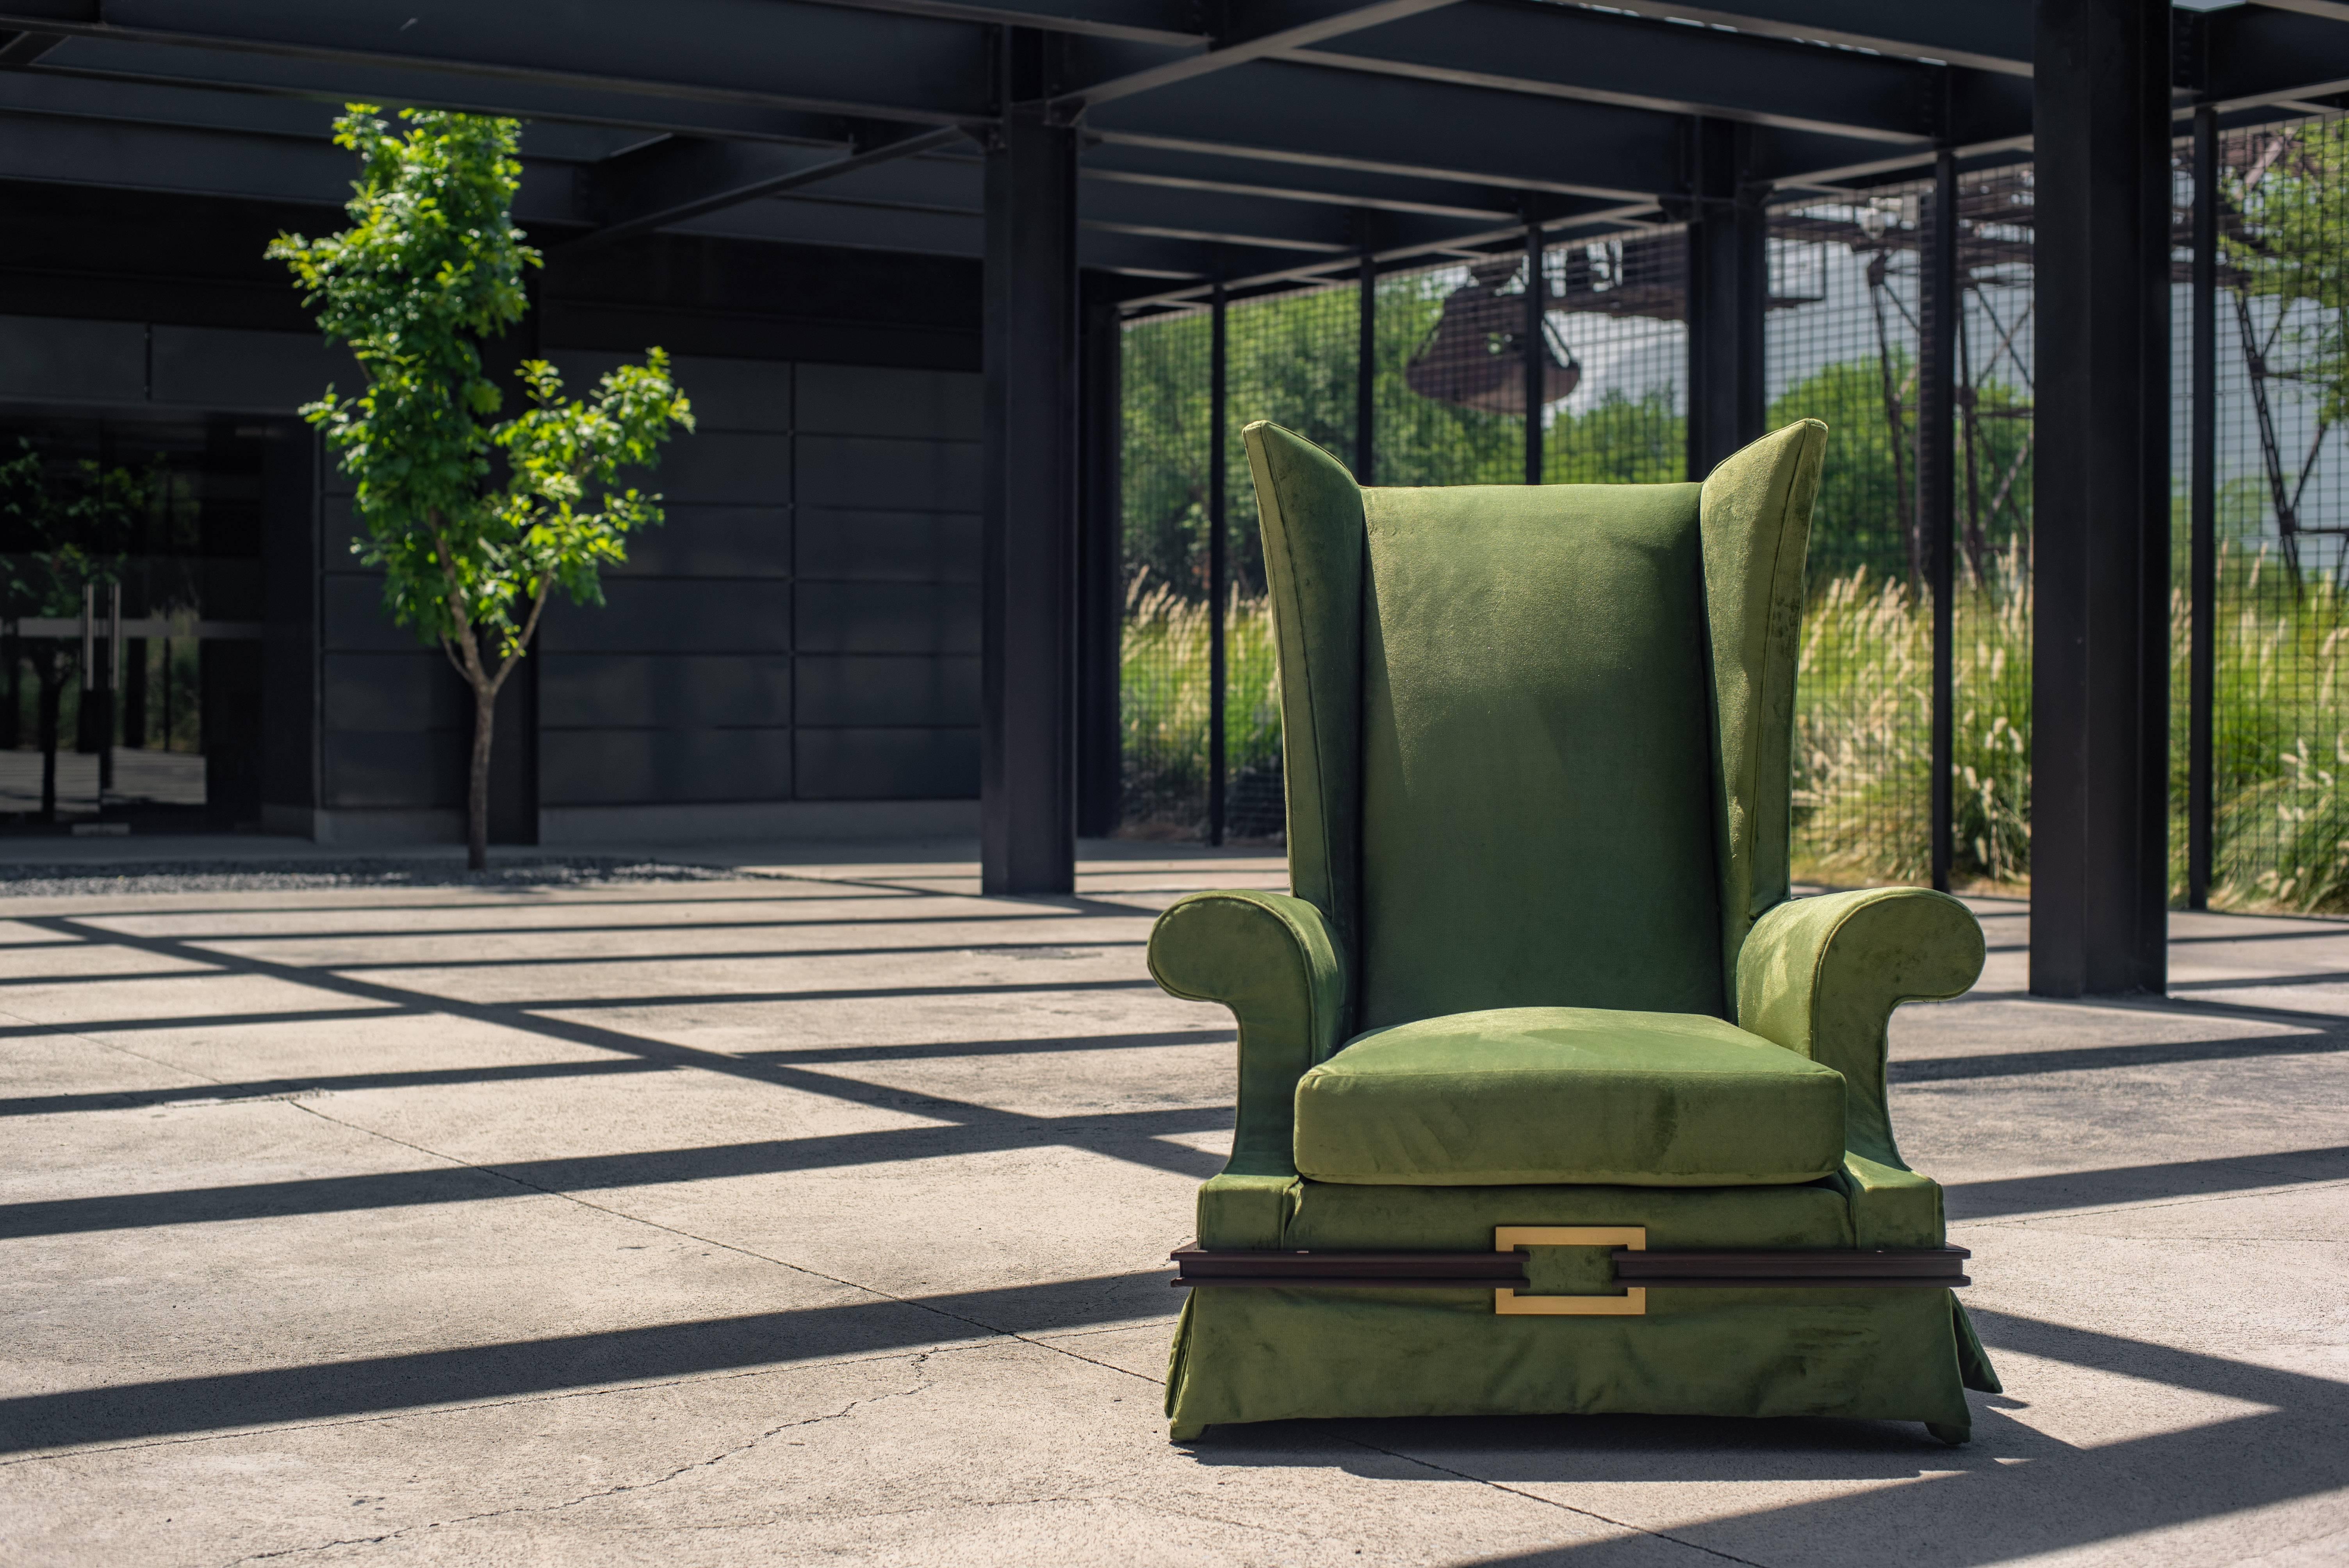 Under the premise of the Block brothers to design personalized pieces we present this majestic Lounge Chair that only this pair of brothers could create. exquisite curves in the arms that interlace the linearity of its backrest, the small solid